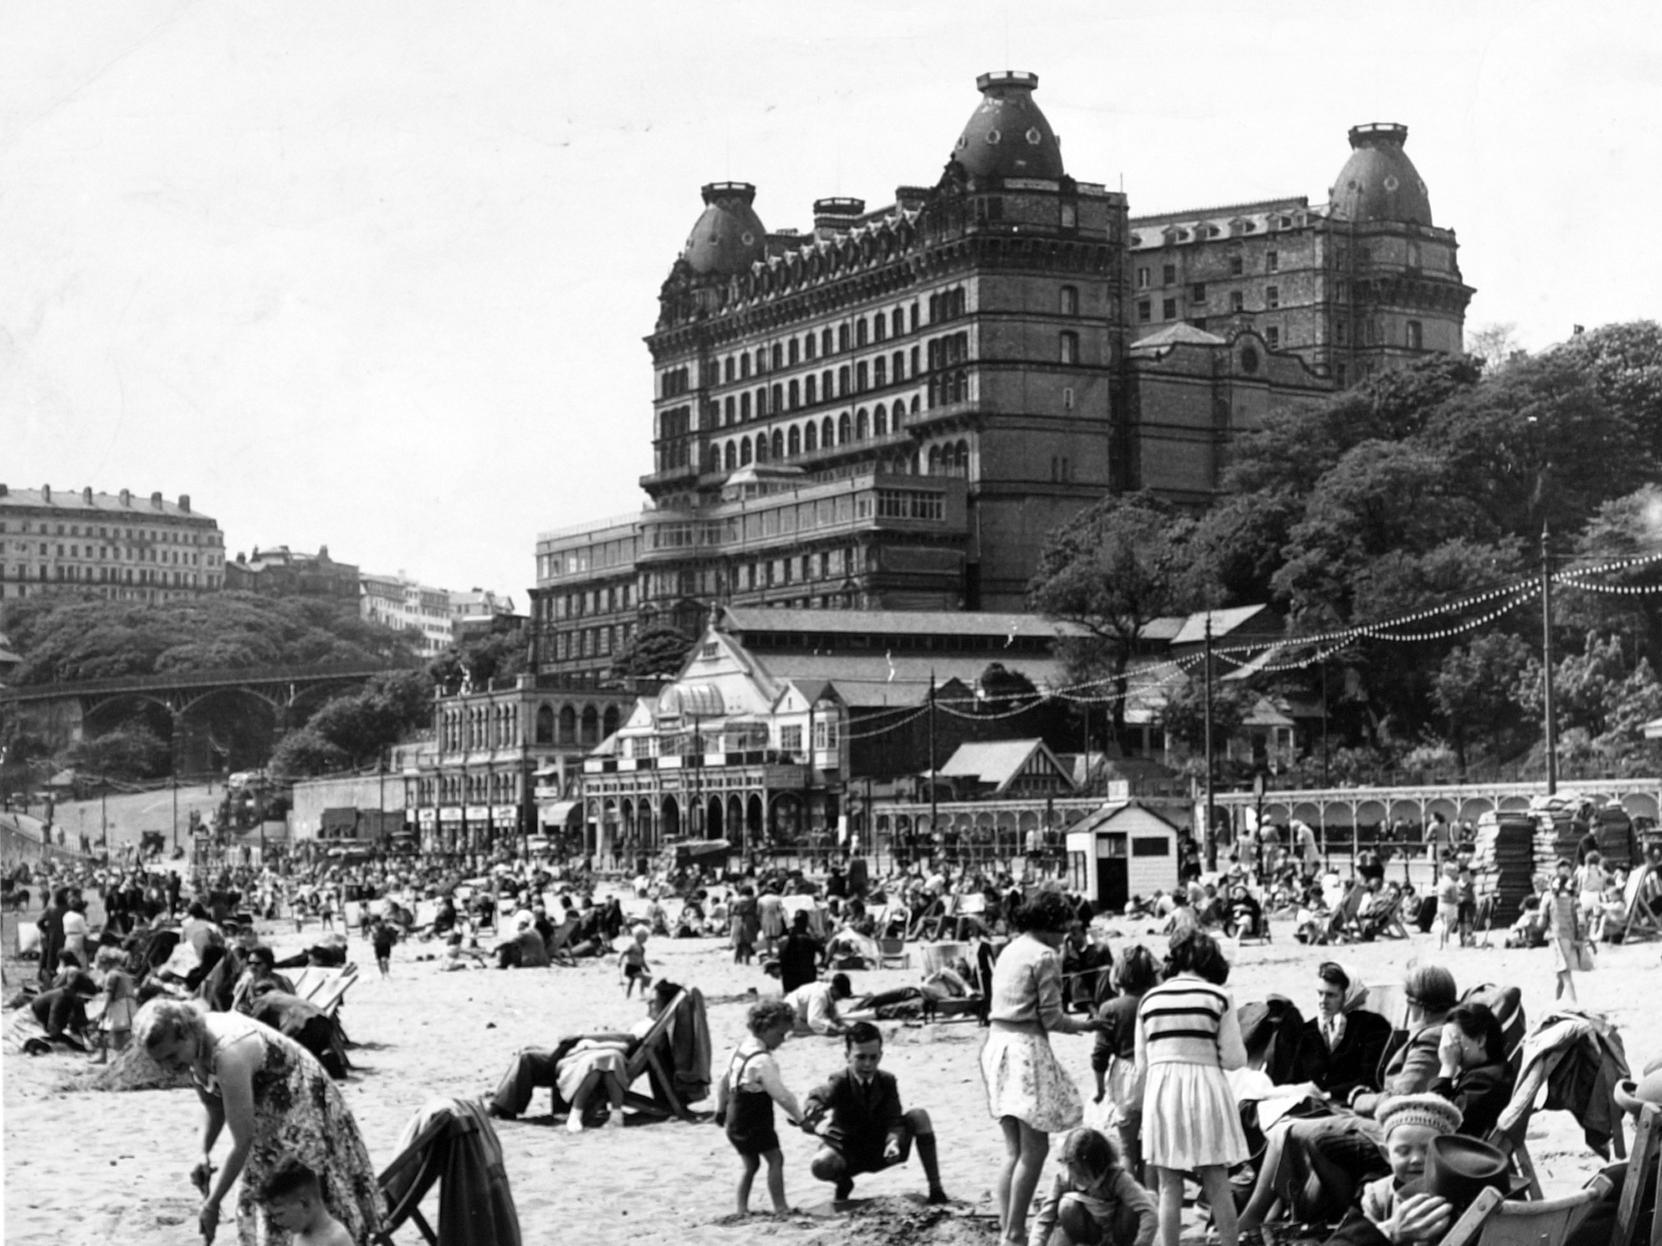 Take a trip back in time to 1960s Scarborough.